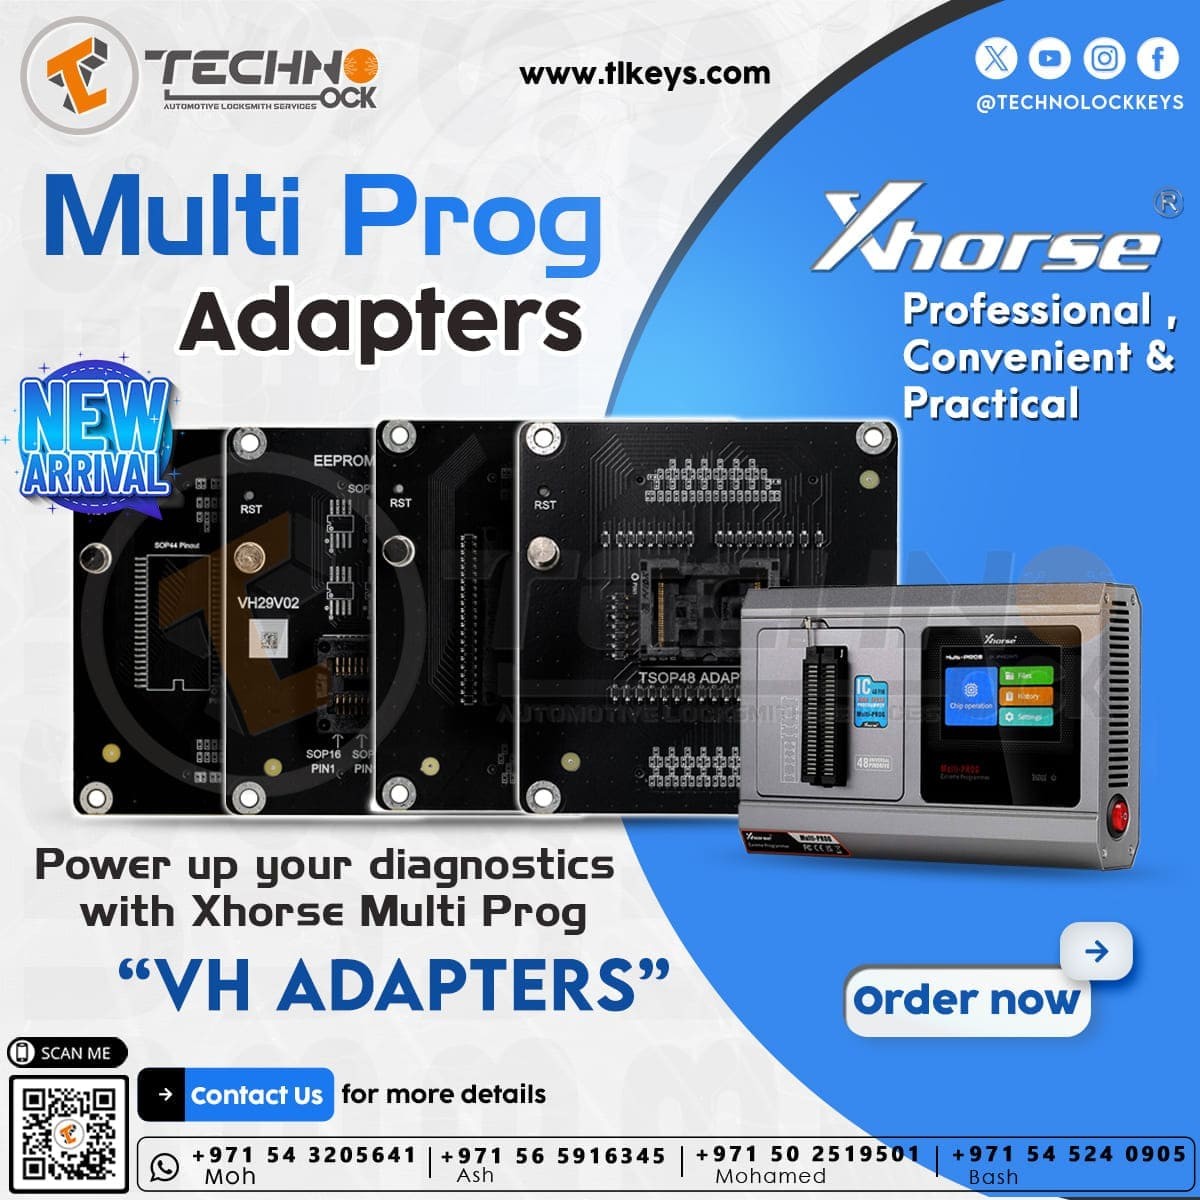 Xhorse Multi Prog Adapters offer professional, convenient, and practical diagnostic solutions.